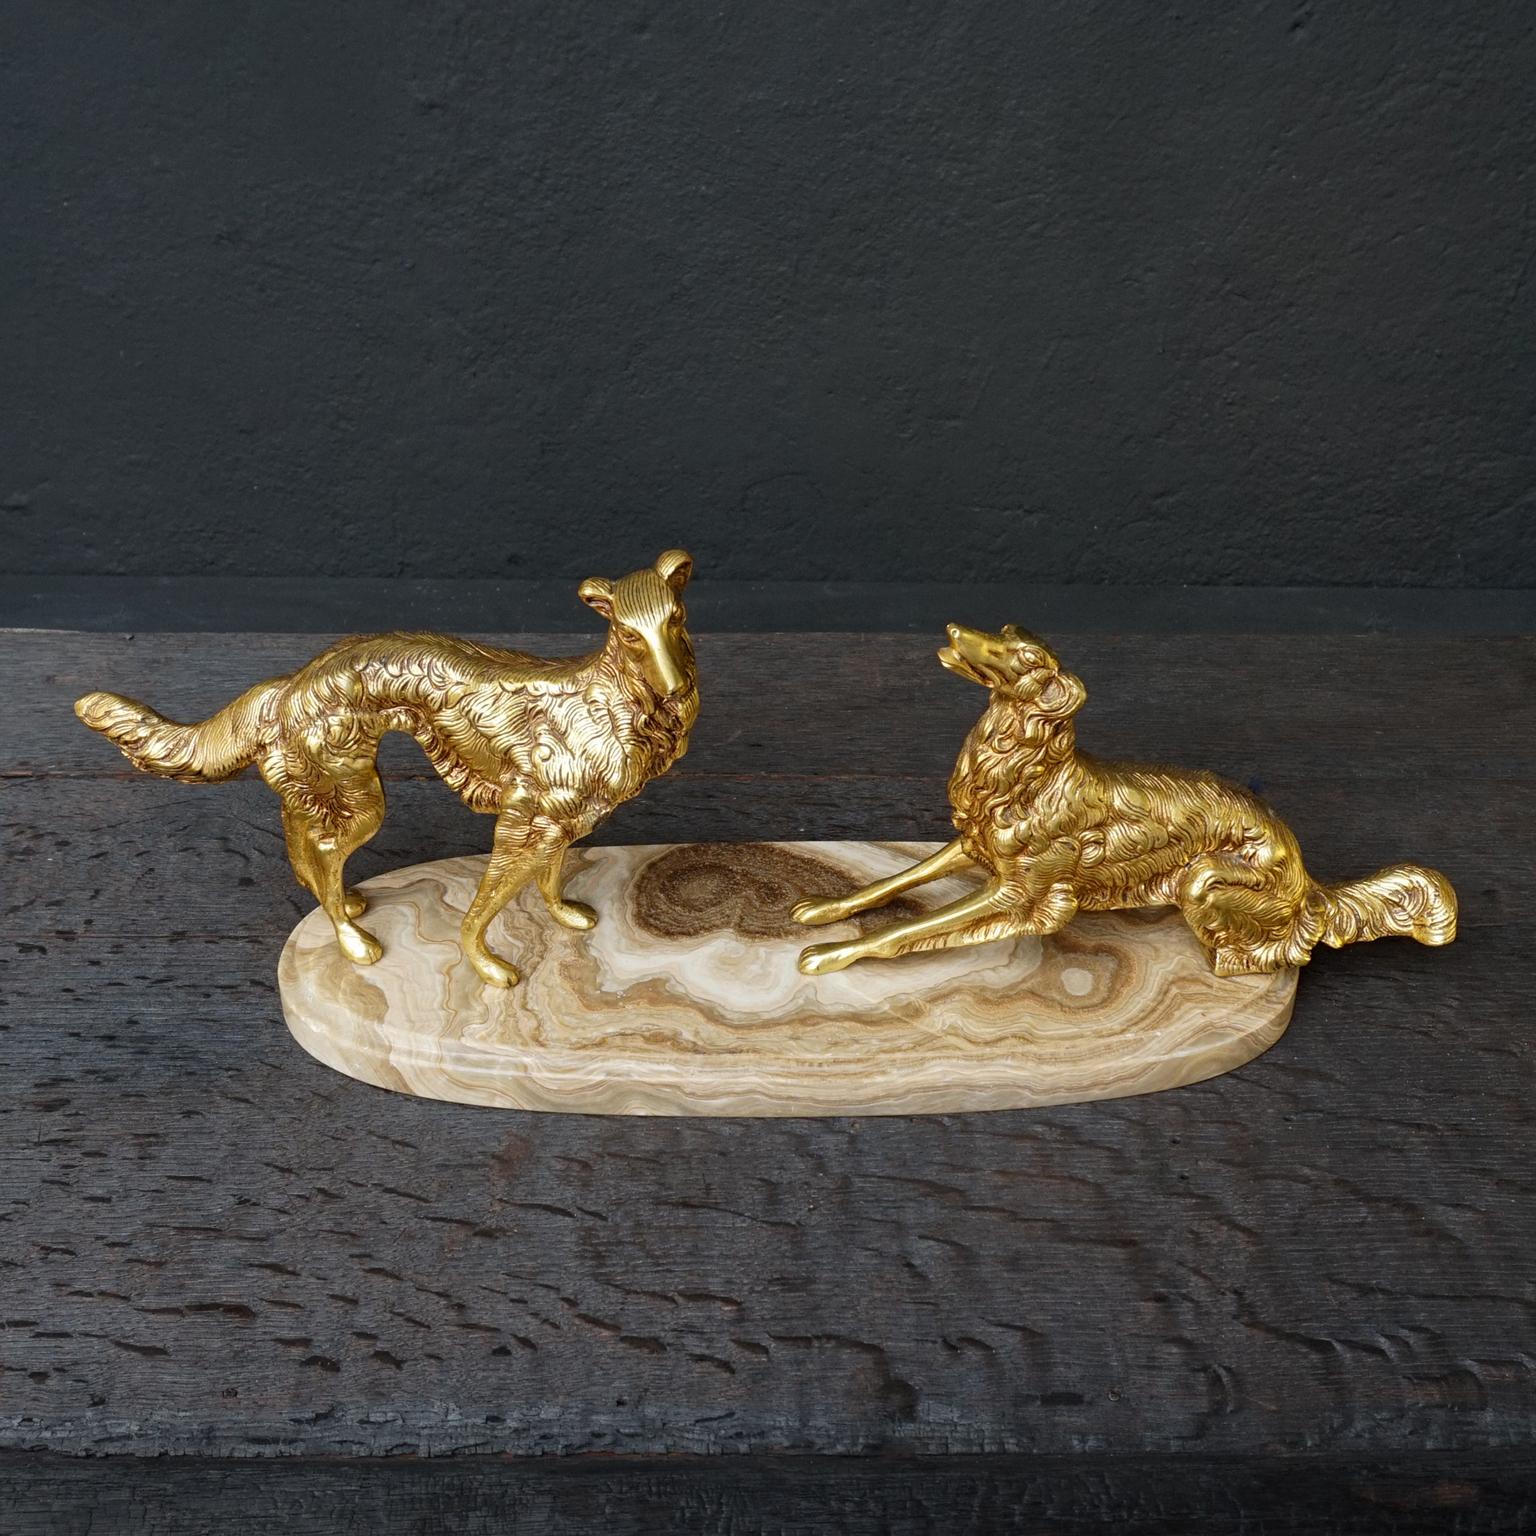 Cast 19th C. Art Deco French Brass Borzoi or Barzoi Dogs on 'Cafe au Lait' Marble